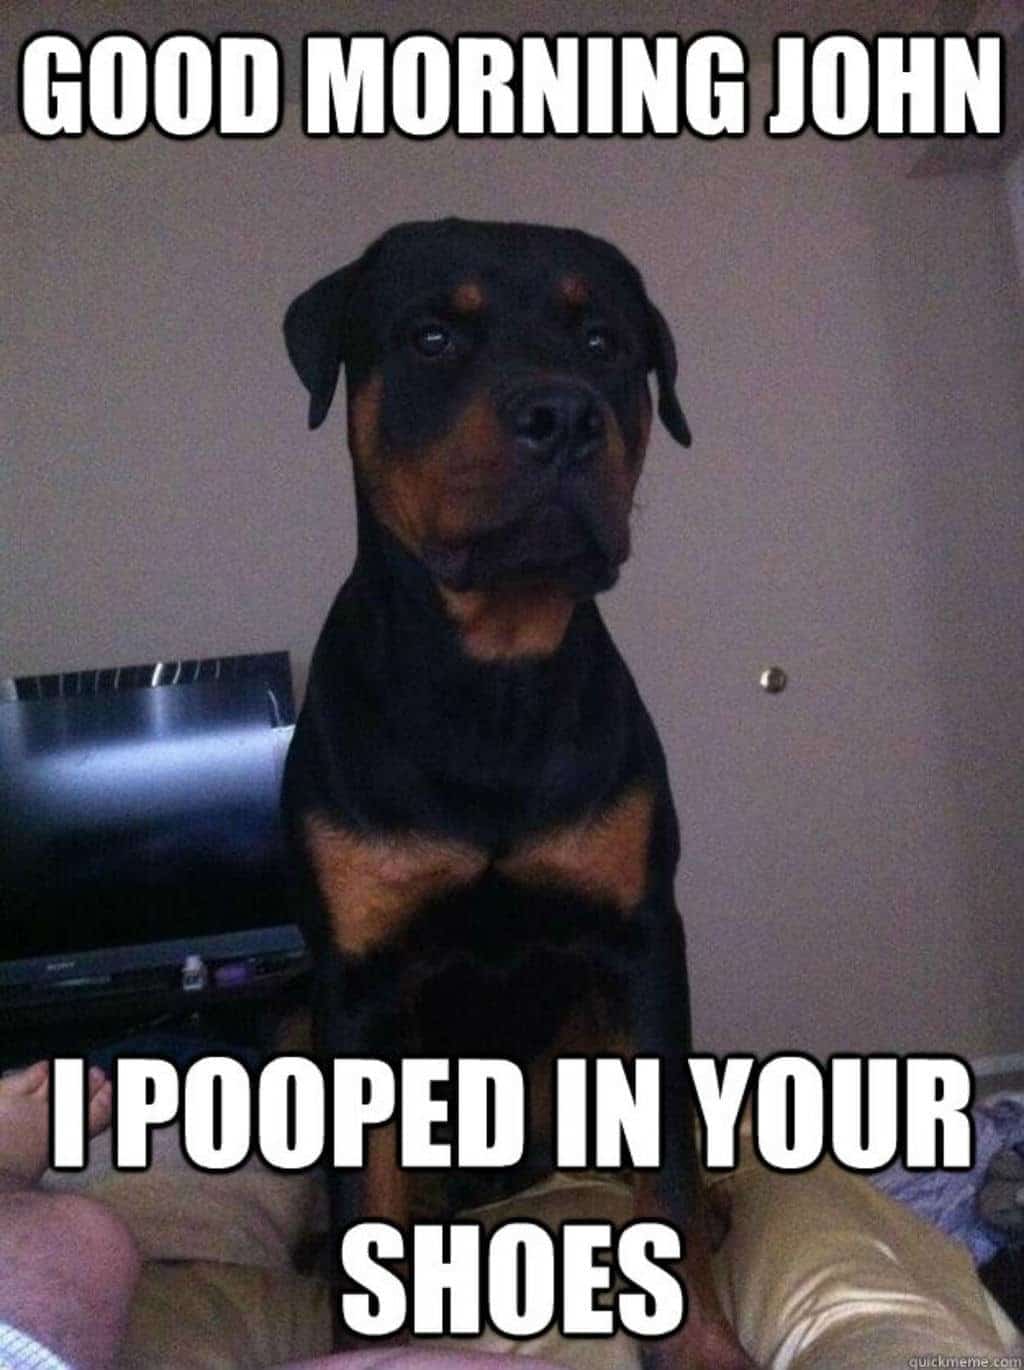 I pooped in your shoes